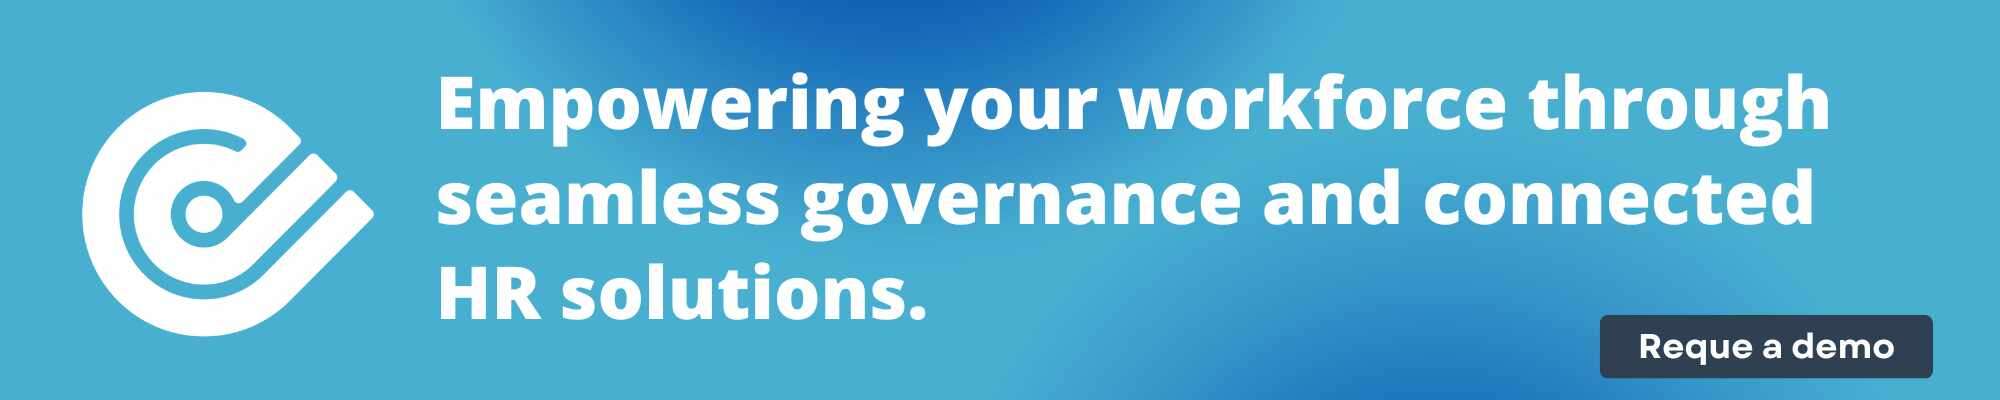 Empowering your workforce through seamless governance and connected HR solutions.